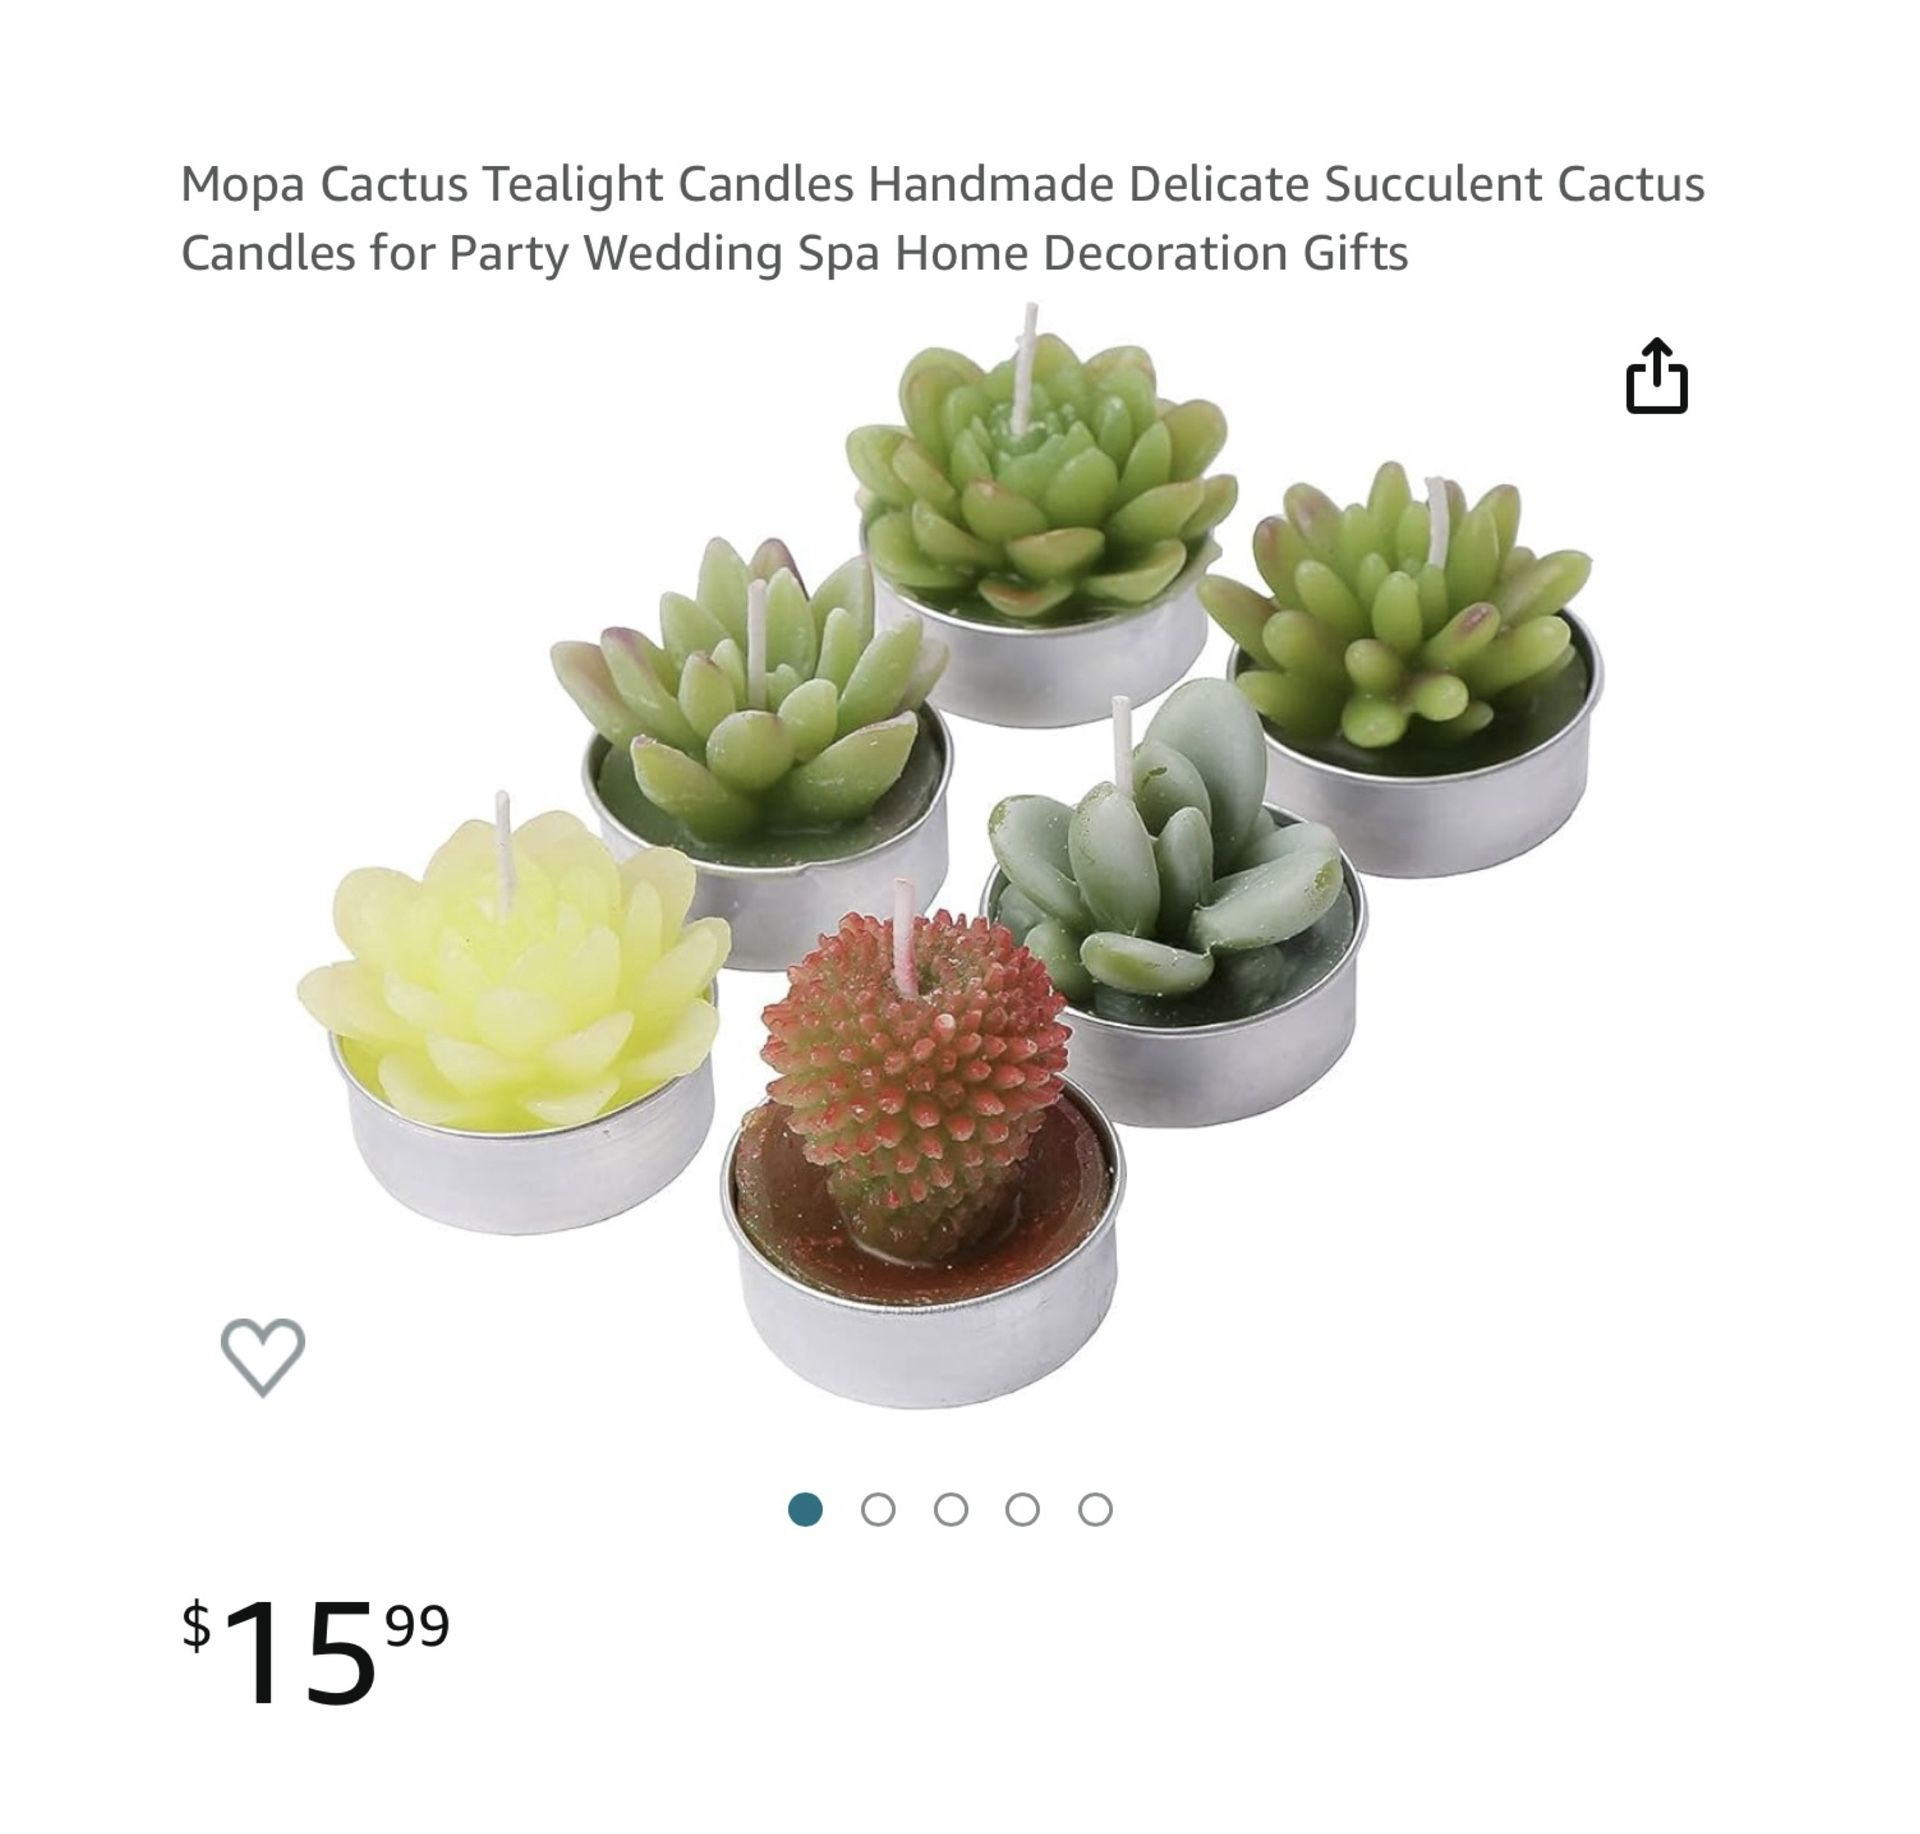 Brand new Cactus Tealight Candles Handmade Delicate Succulent Cactus Candles for Party Wedding Spa Home Decoration Gifts  Quantity: 6 pieces candles i